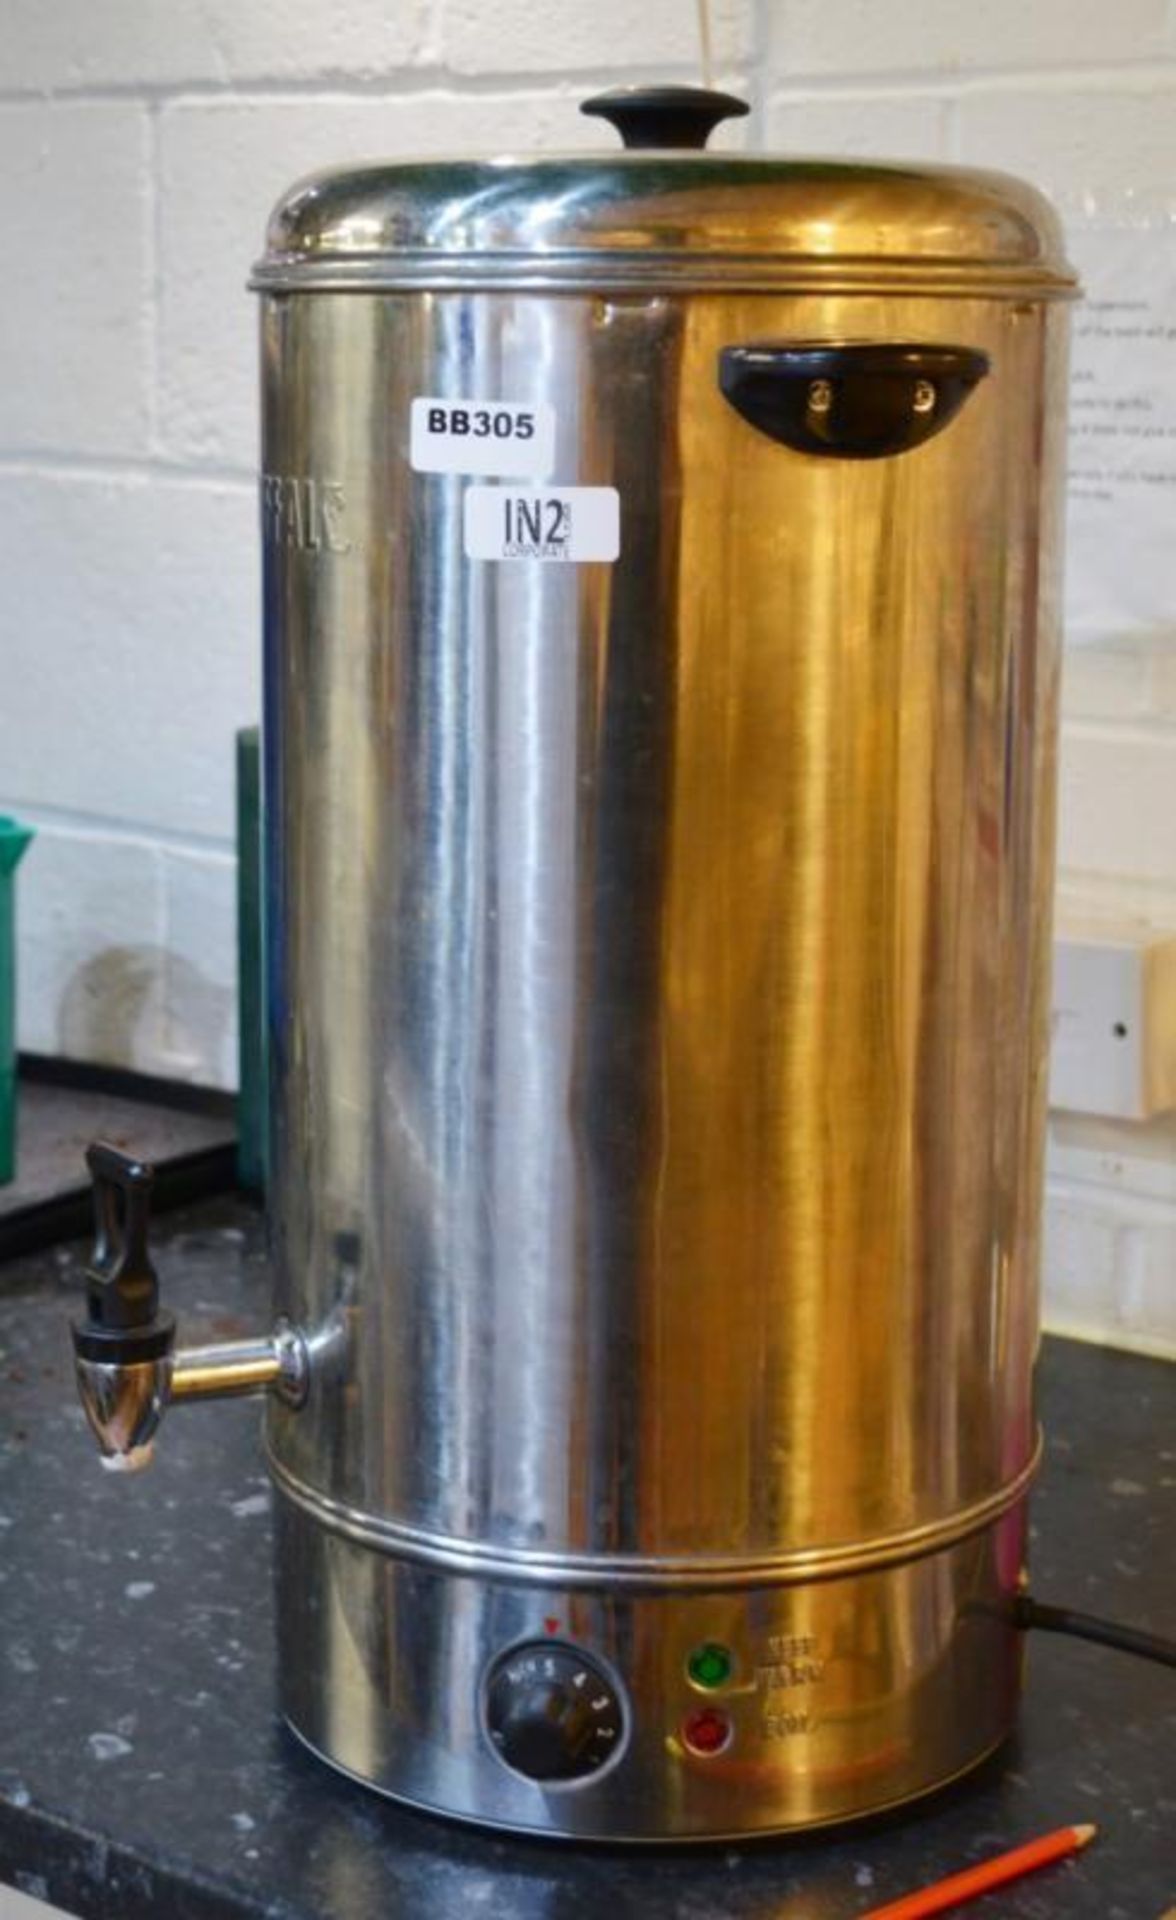 1 x Buffalo GL347 Manual Fill Water Boilet&nbsp;20 Litre With Stainless Steel Finish - Ref BB305 PTP